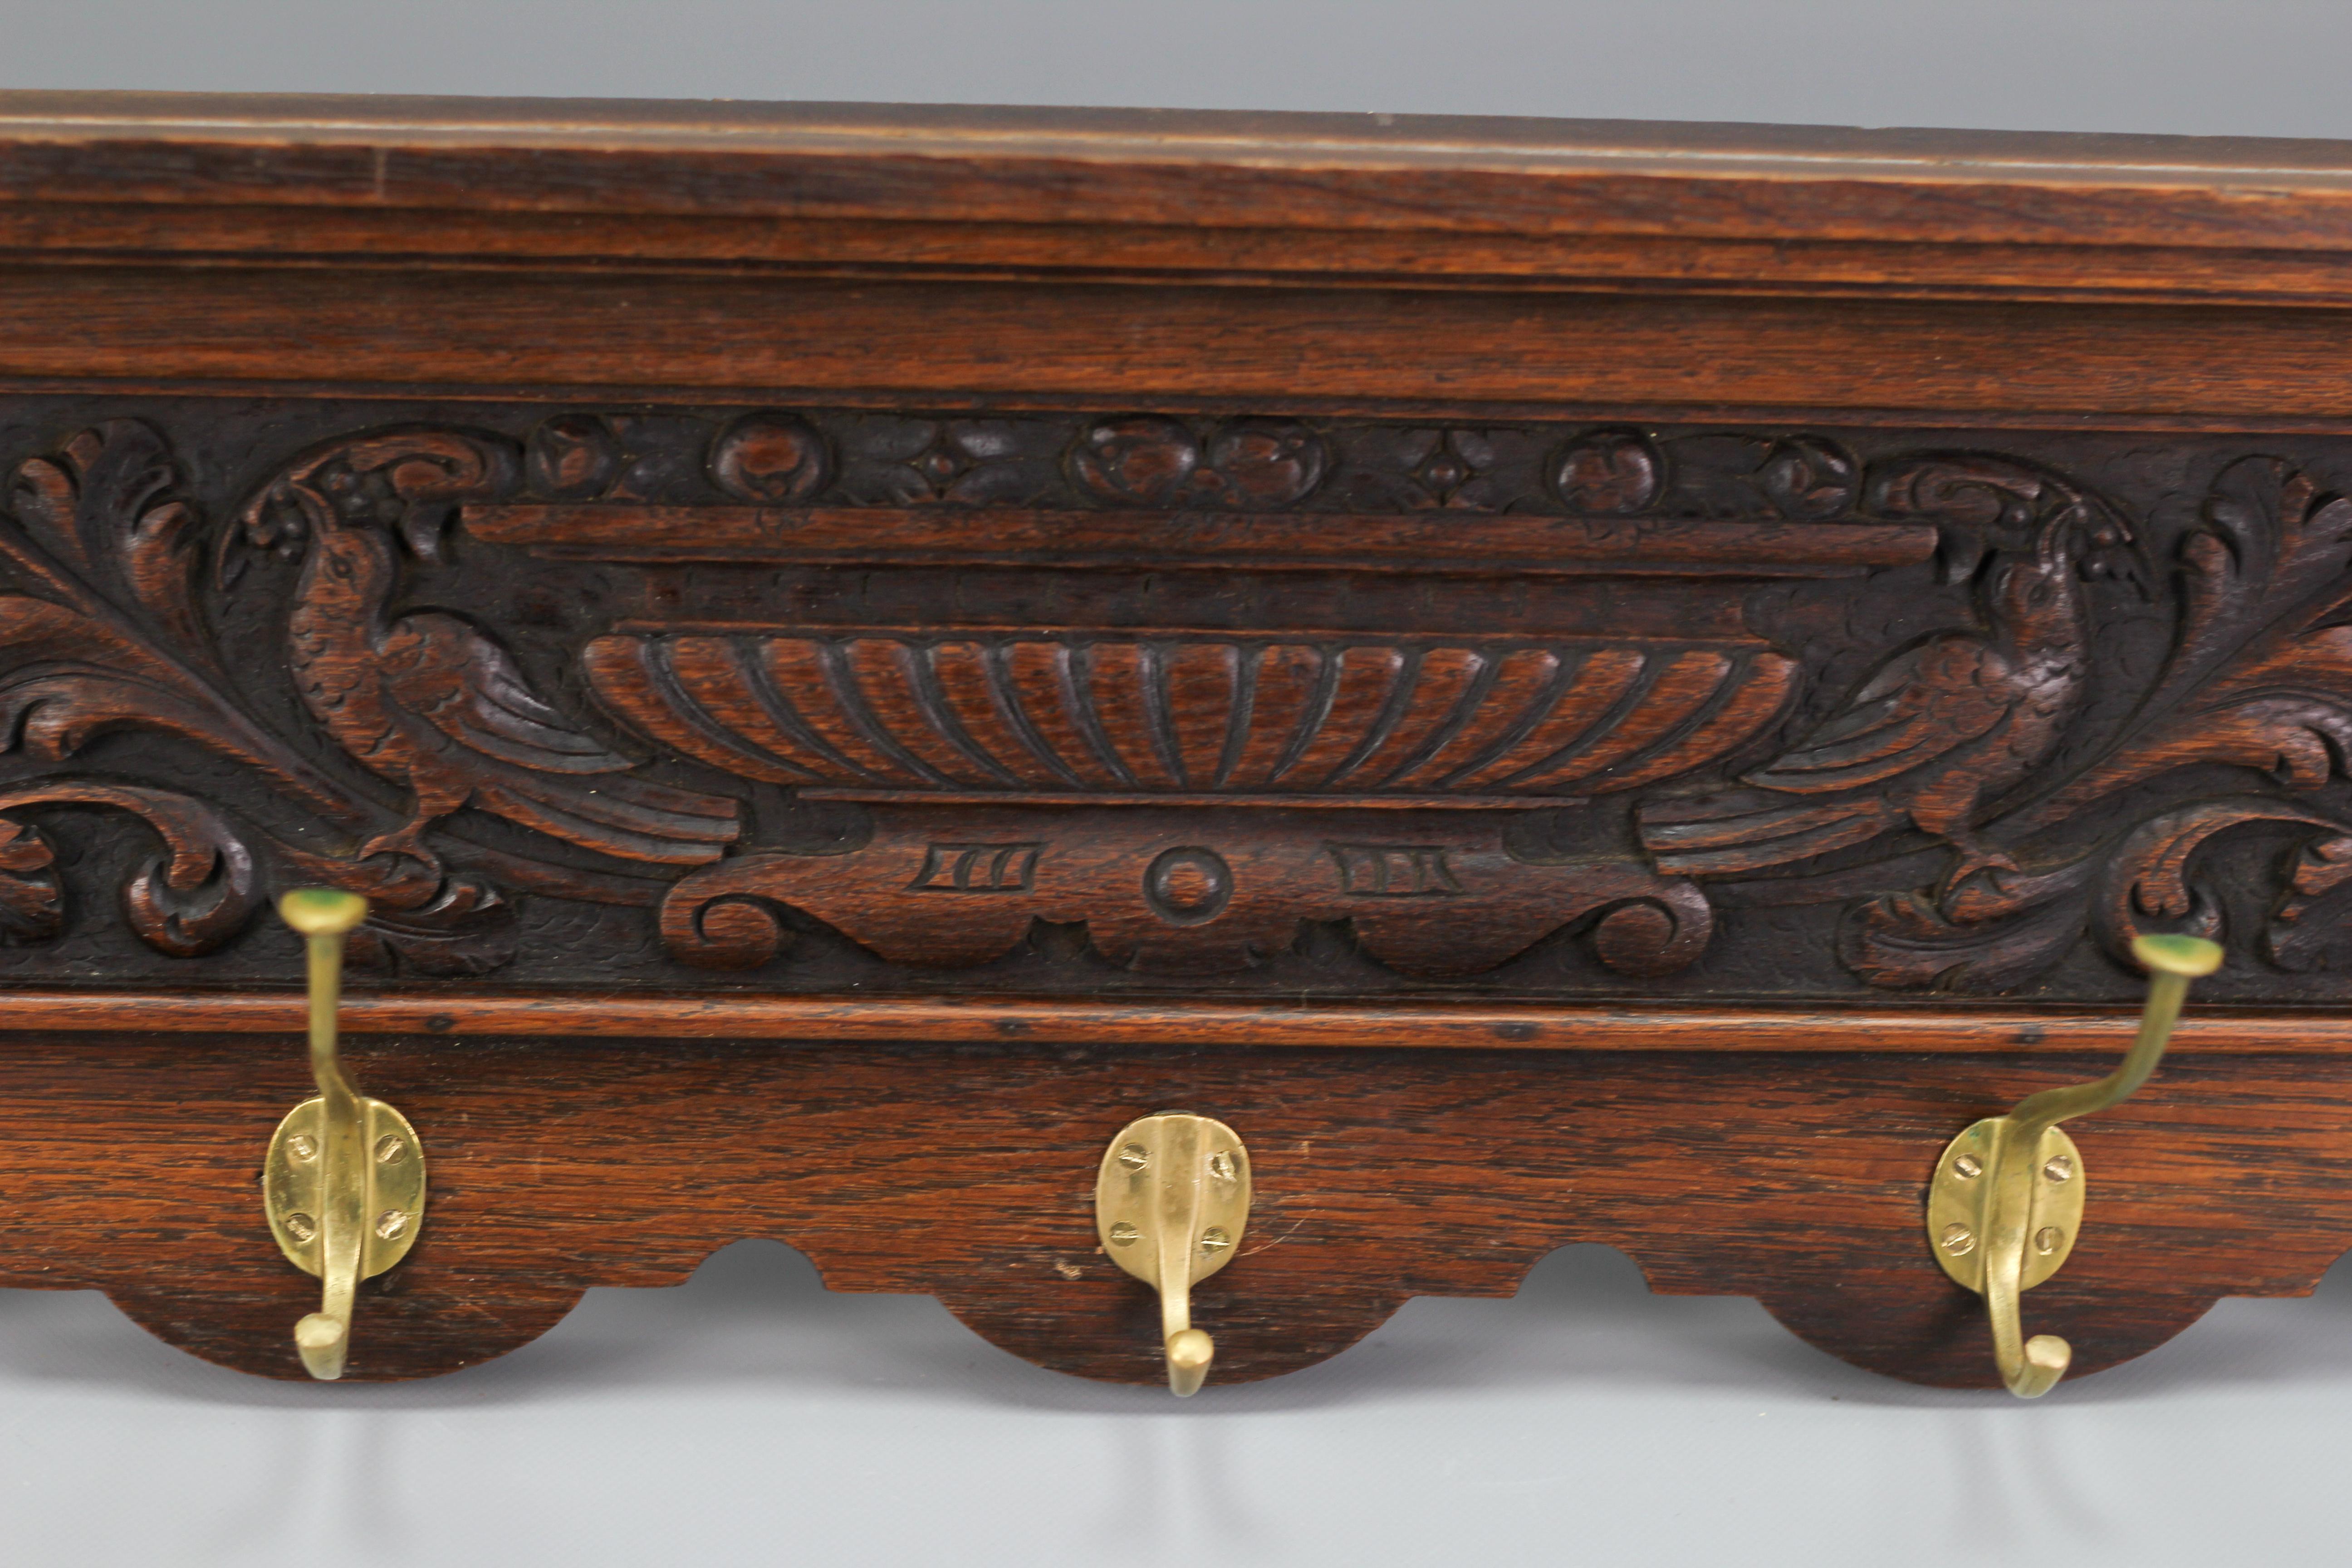 Impressive French hand-carved solid oak wall hanging coat rack from the early 20th century. This beautiful coat rack or hall shelf features stunning carvings of two lion heads at each end of the shelf, adorned with scrolled leaves and birds in the